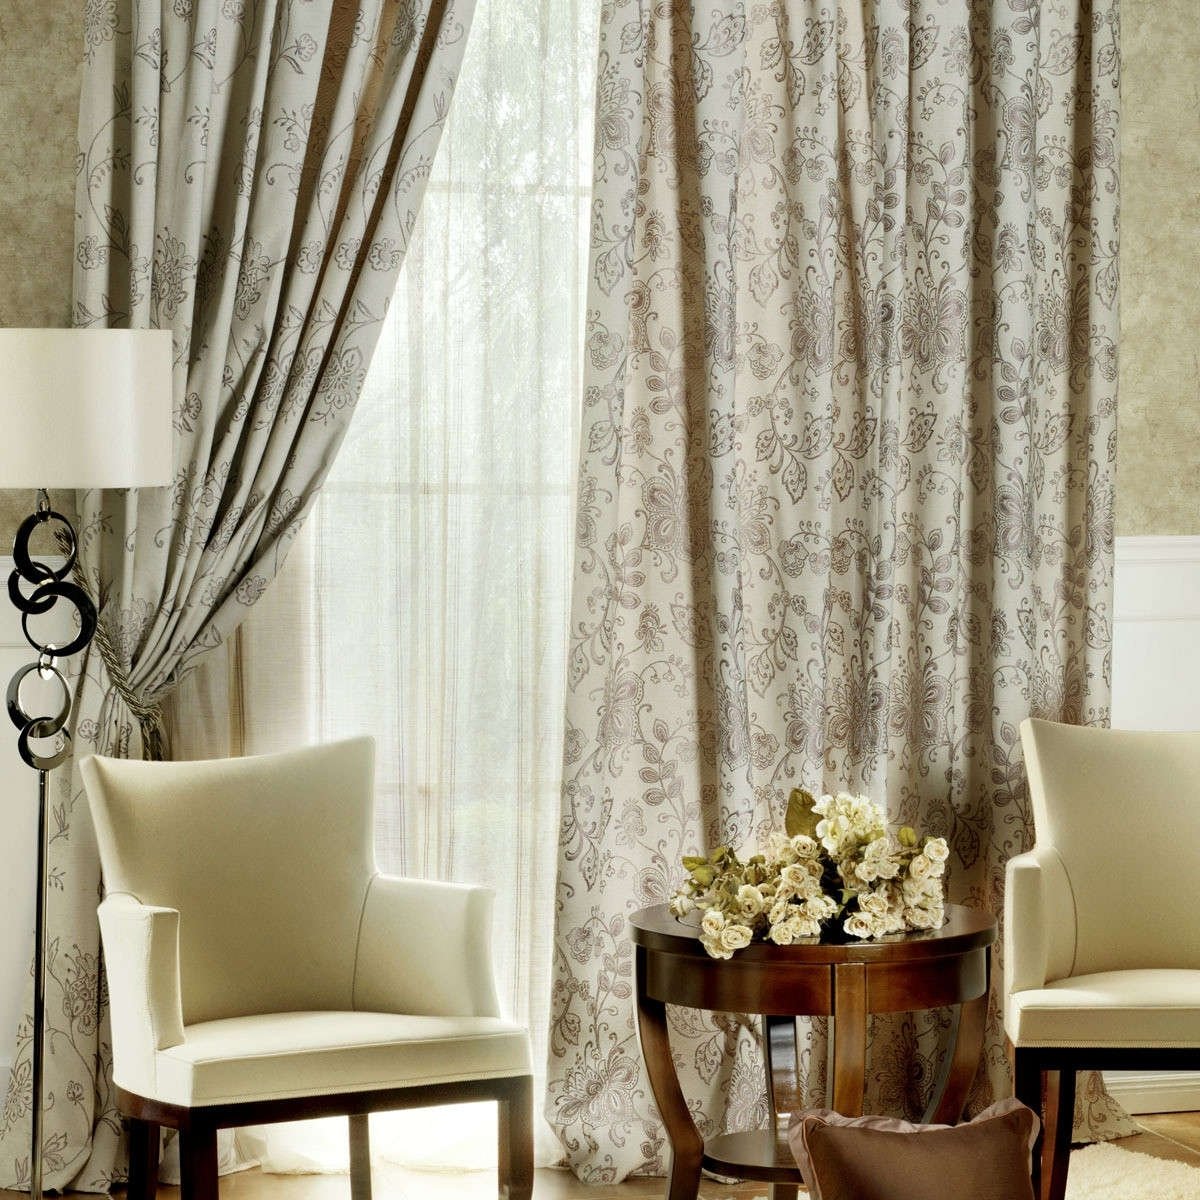 10 Lovely Curtain Ideas For Living Room luxury inspiration images curtains living room inspiration curtains 2022